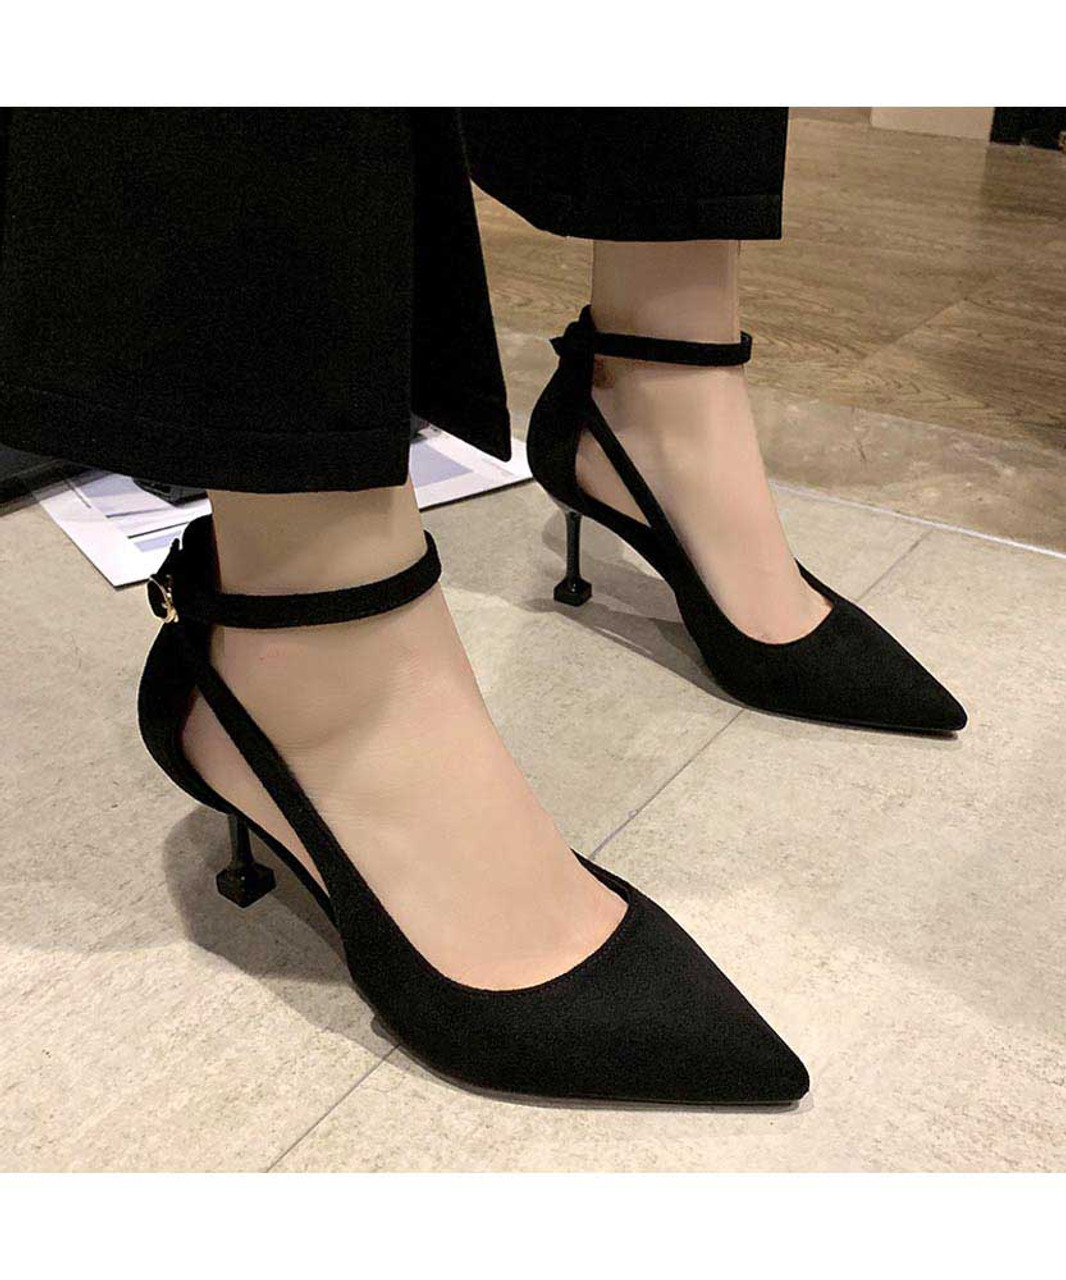 Black suede ankle buckle cut out high heel shoe | Womens heel shoes ...